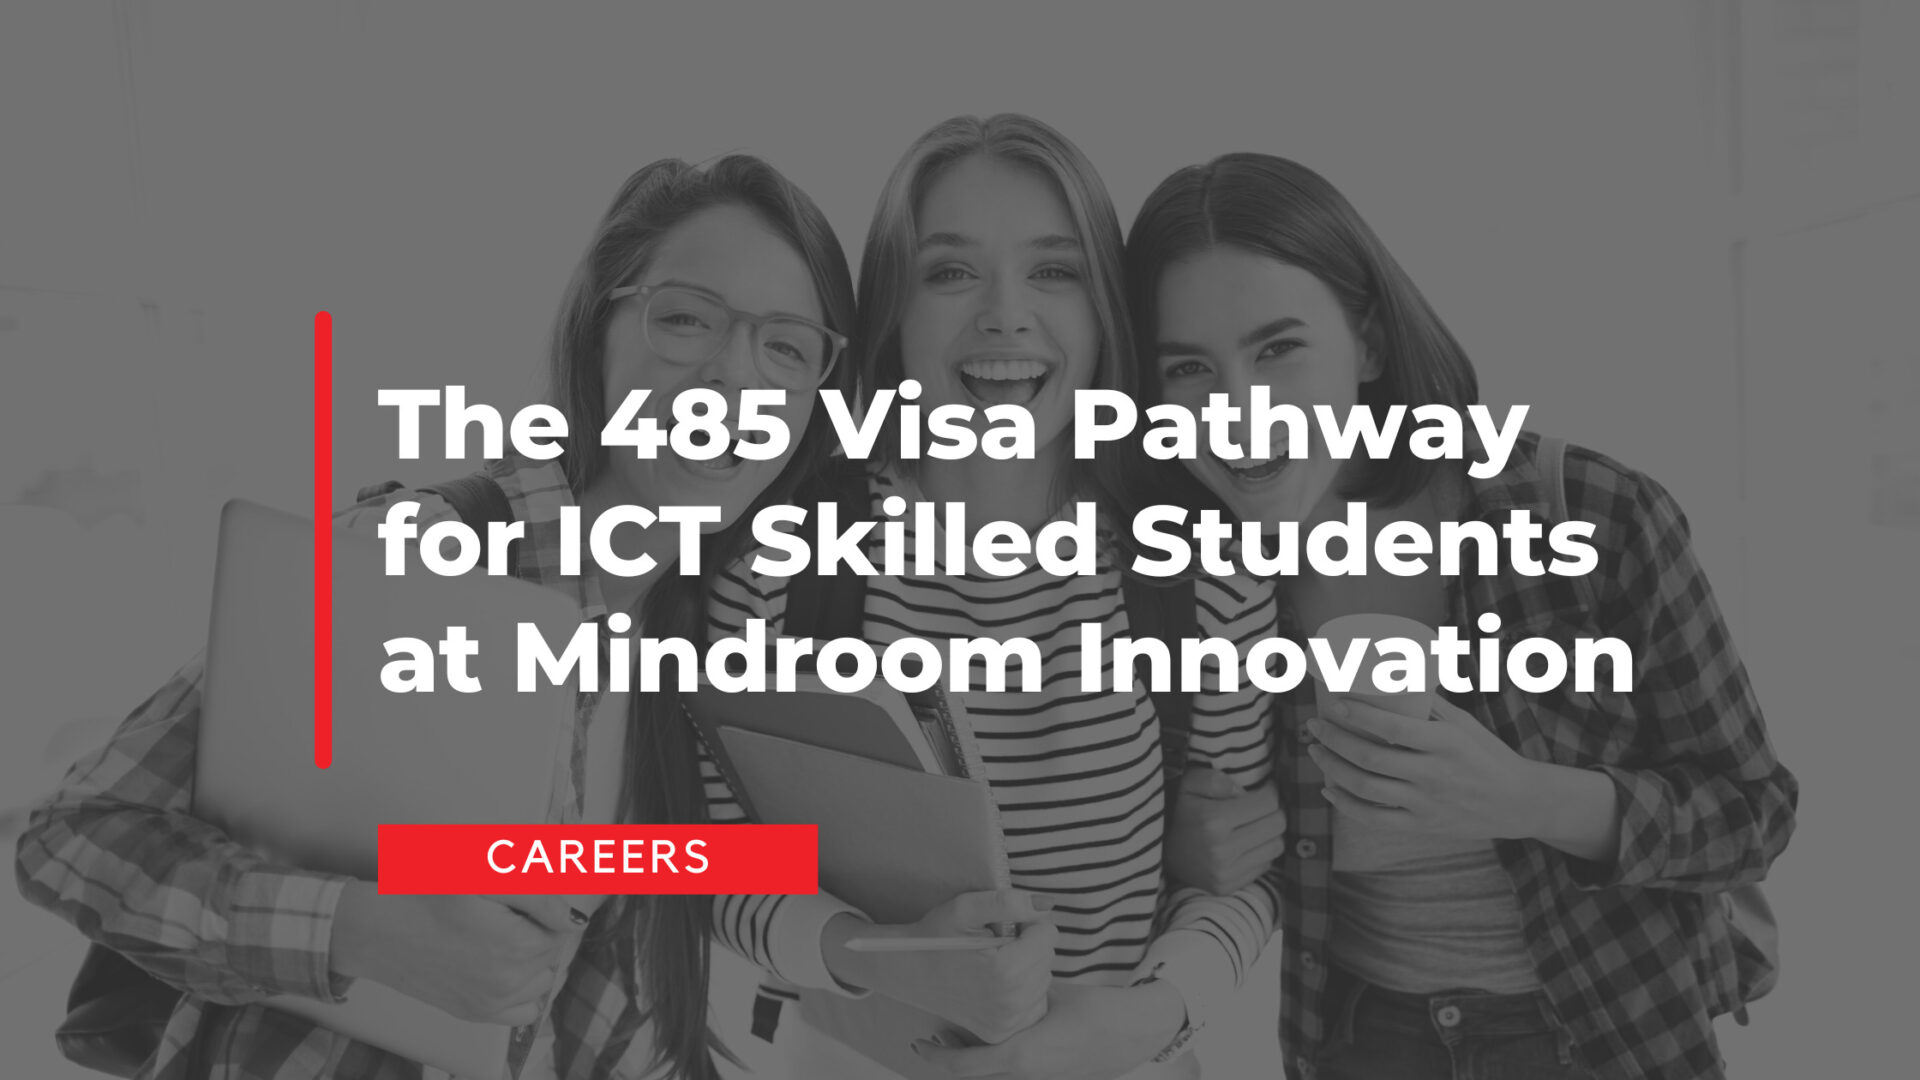 The 485 Visa Pathway for ICT Skilled Students at Mindroom Innovation